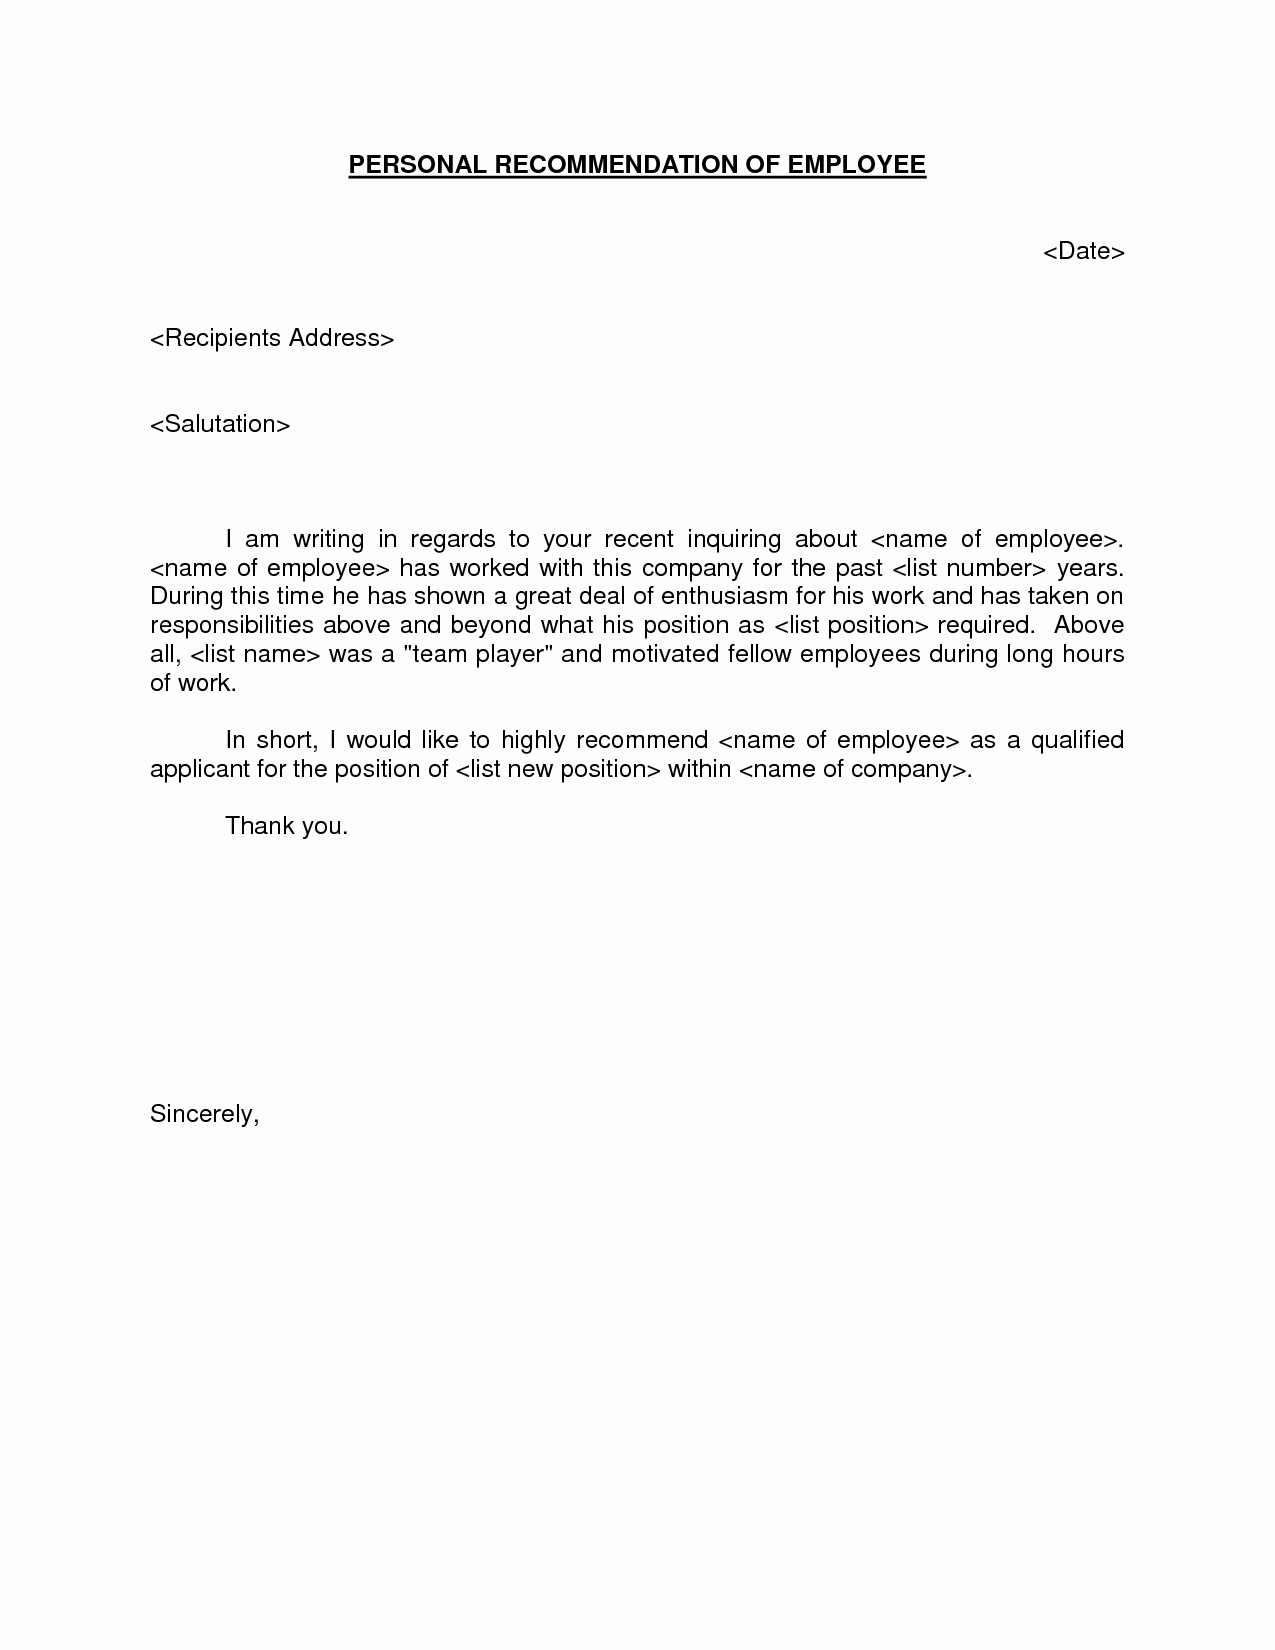 Personal Recommendation Letter Sample New 4 Amazing Sample Re Mendation Letter